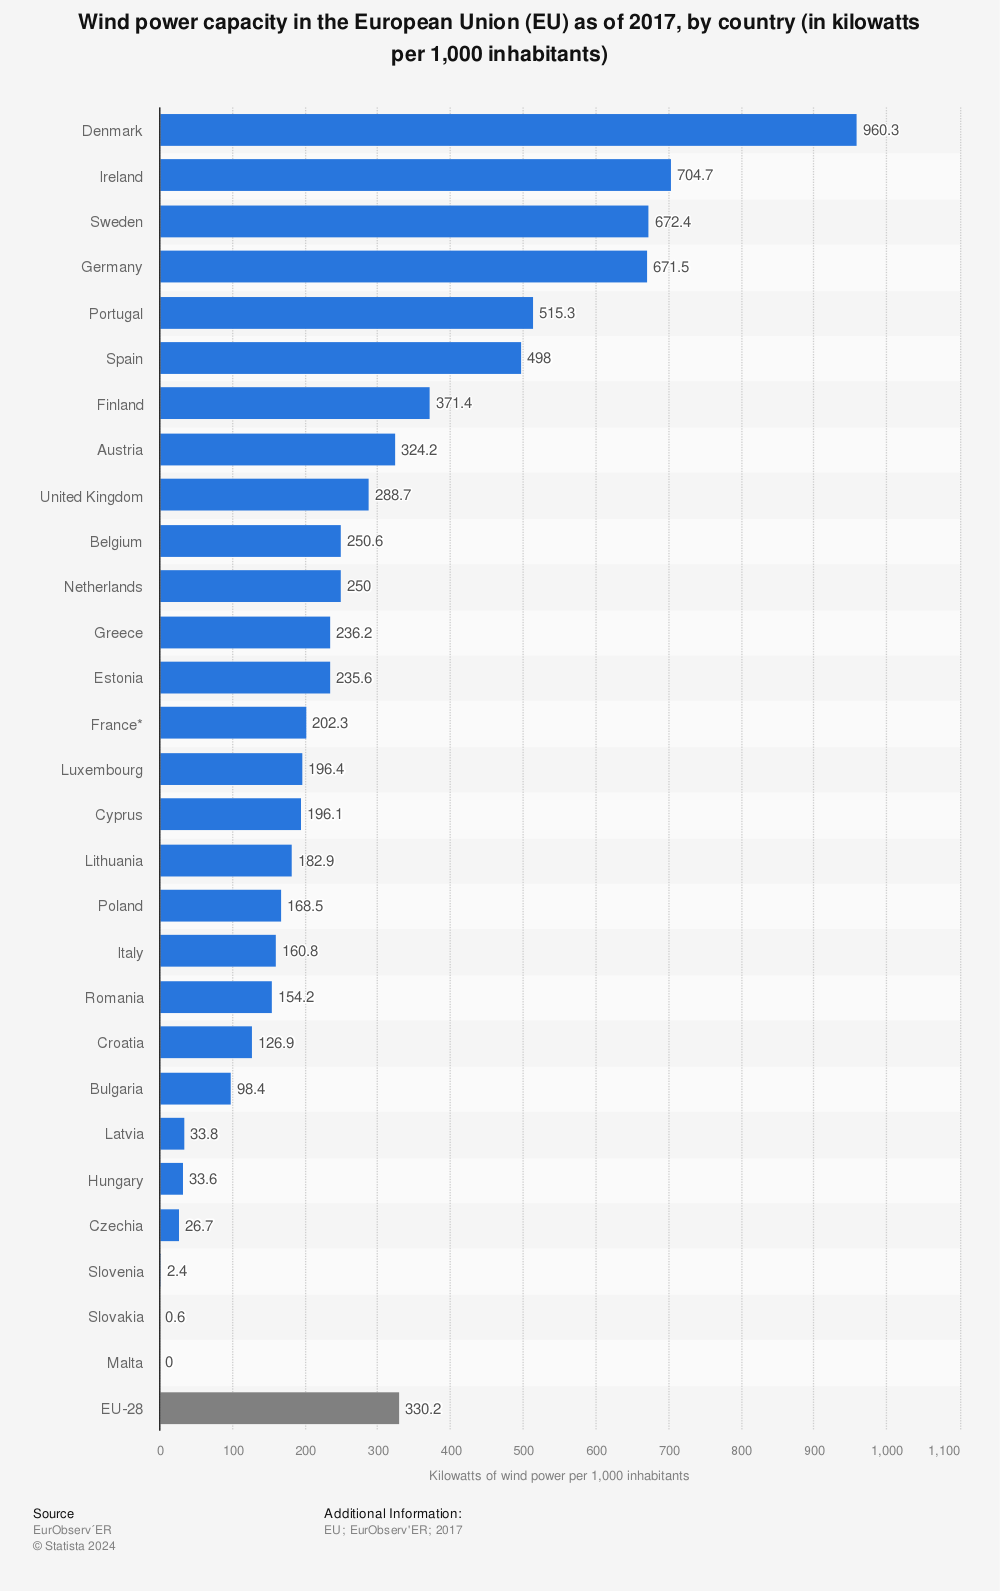 Statistic: Wind power capacity in the European Union (EU) as of 2017, by country (in kilowatts per 1,000 inhabitants) | Statista